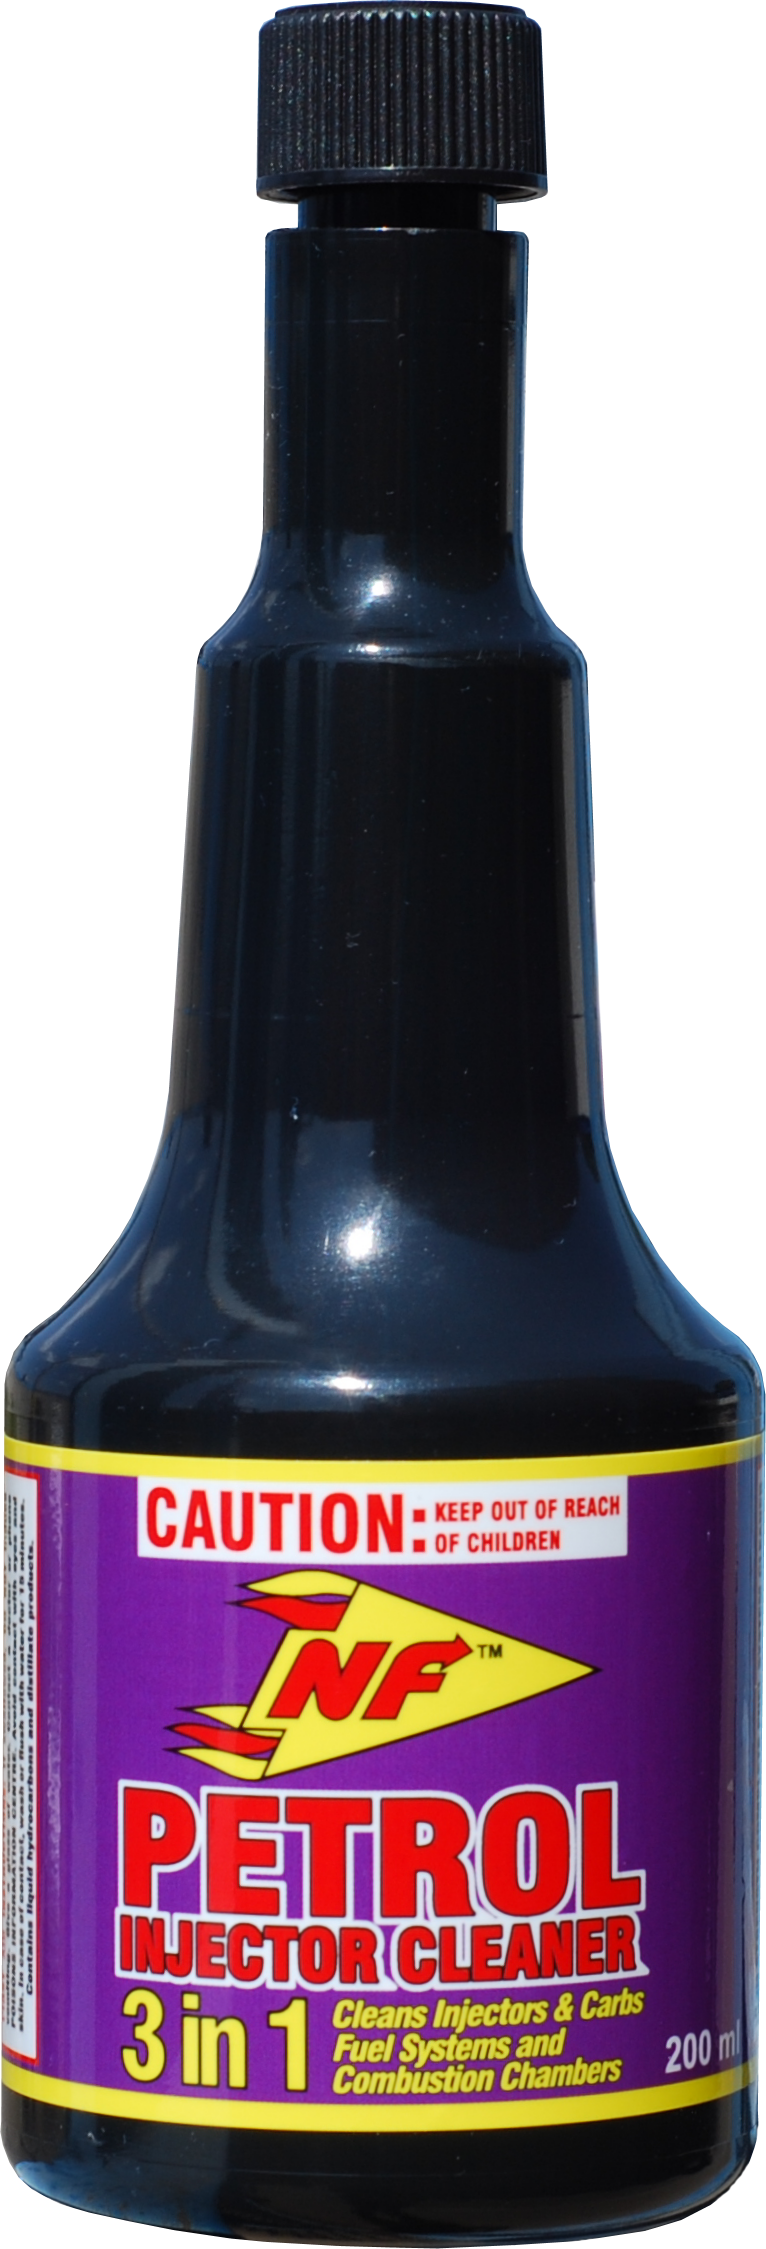 NF Petrol Injector Cleaner